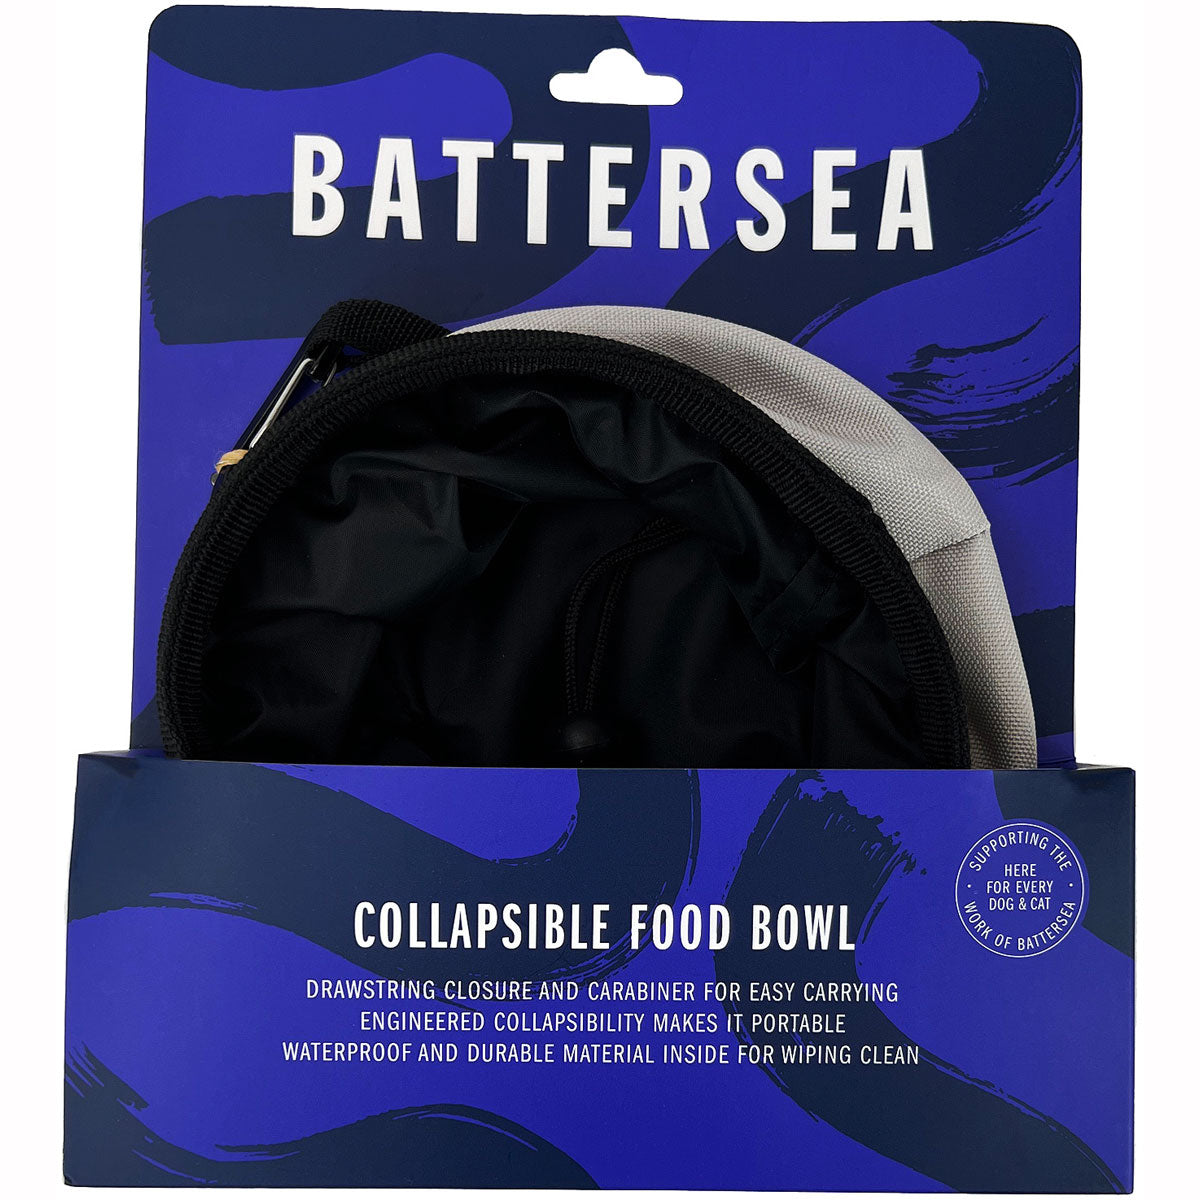 The Battersea Collapsible Pet Food Bowl: Fun mealtime for your furry friends wherever you are - Packaging